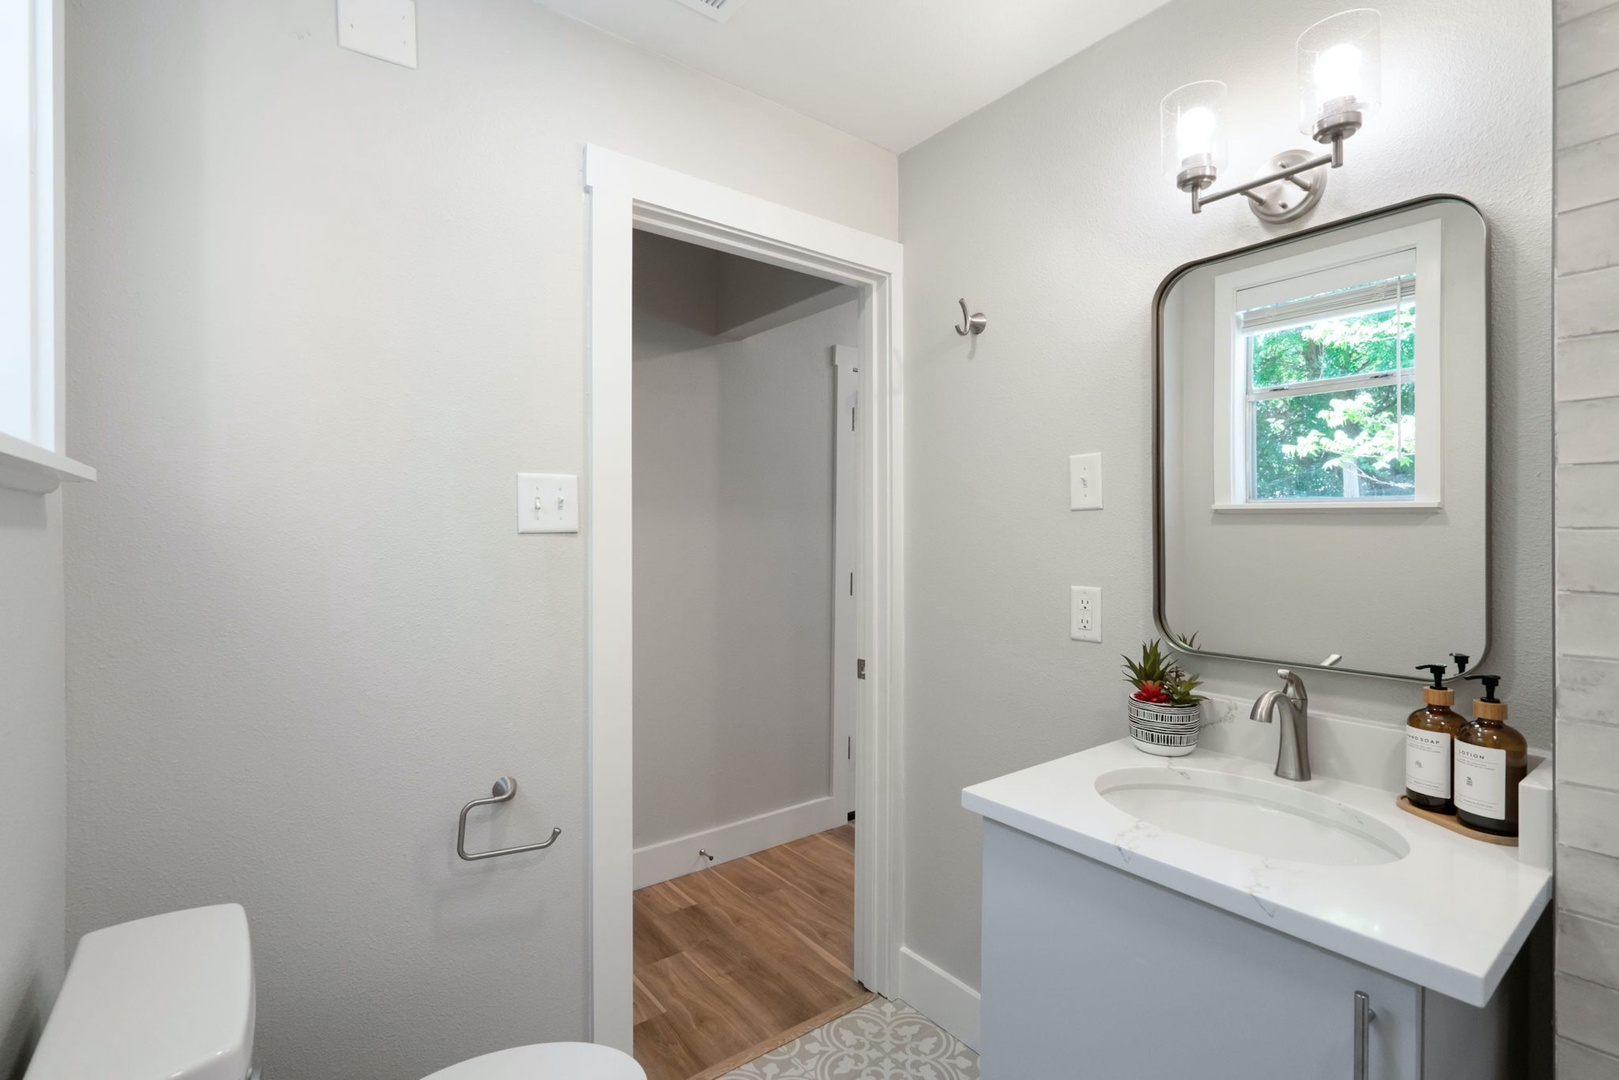 The stylish full bathroom features a single vanity & shower/tub combo